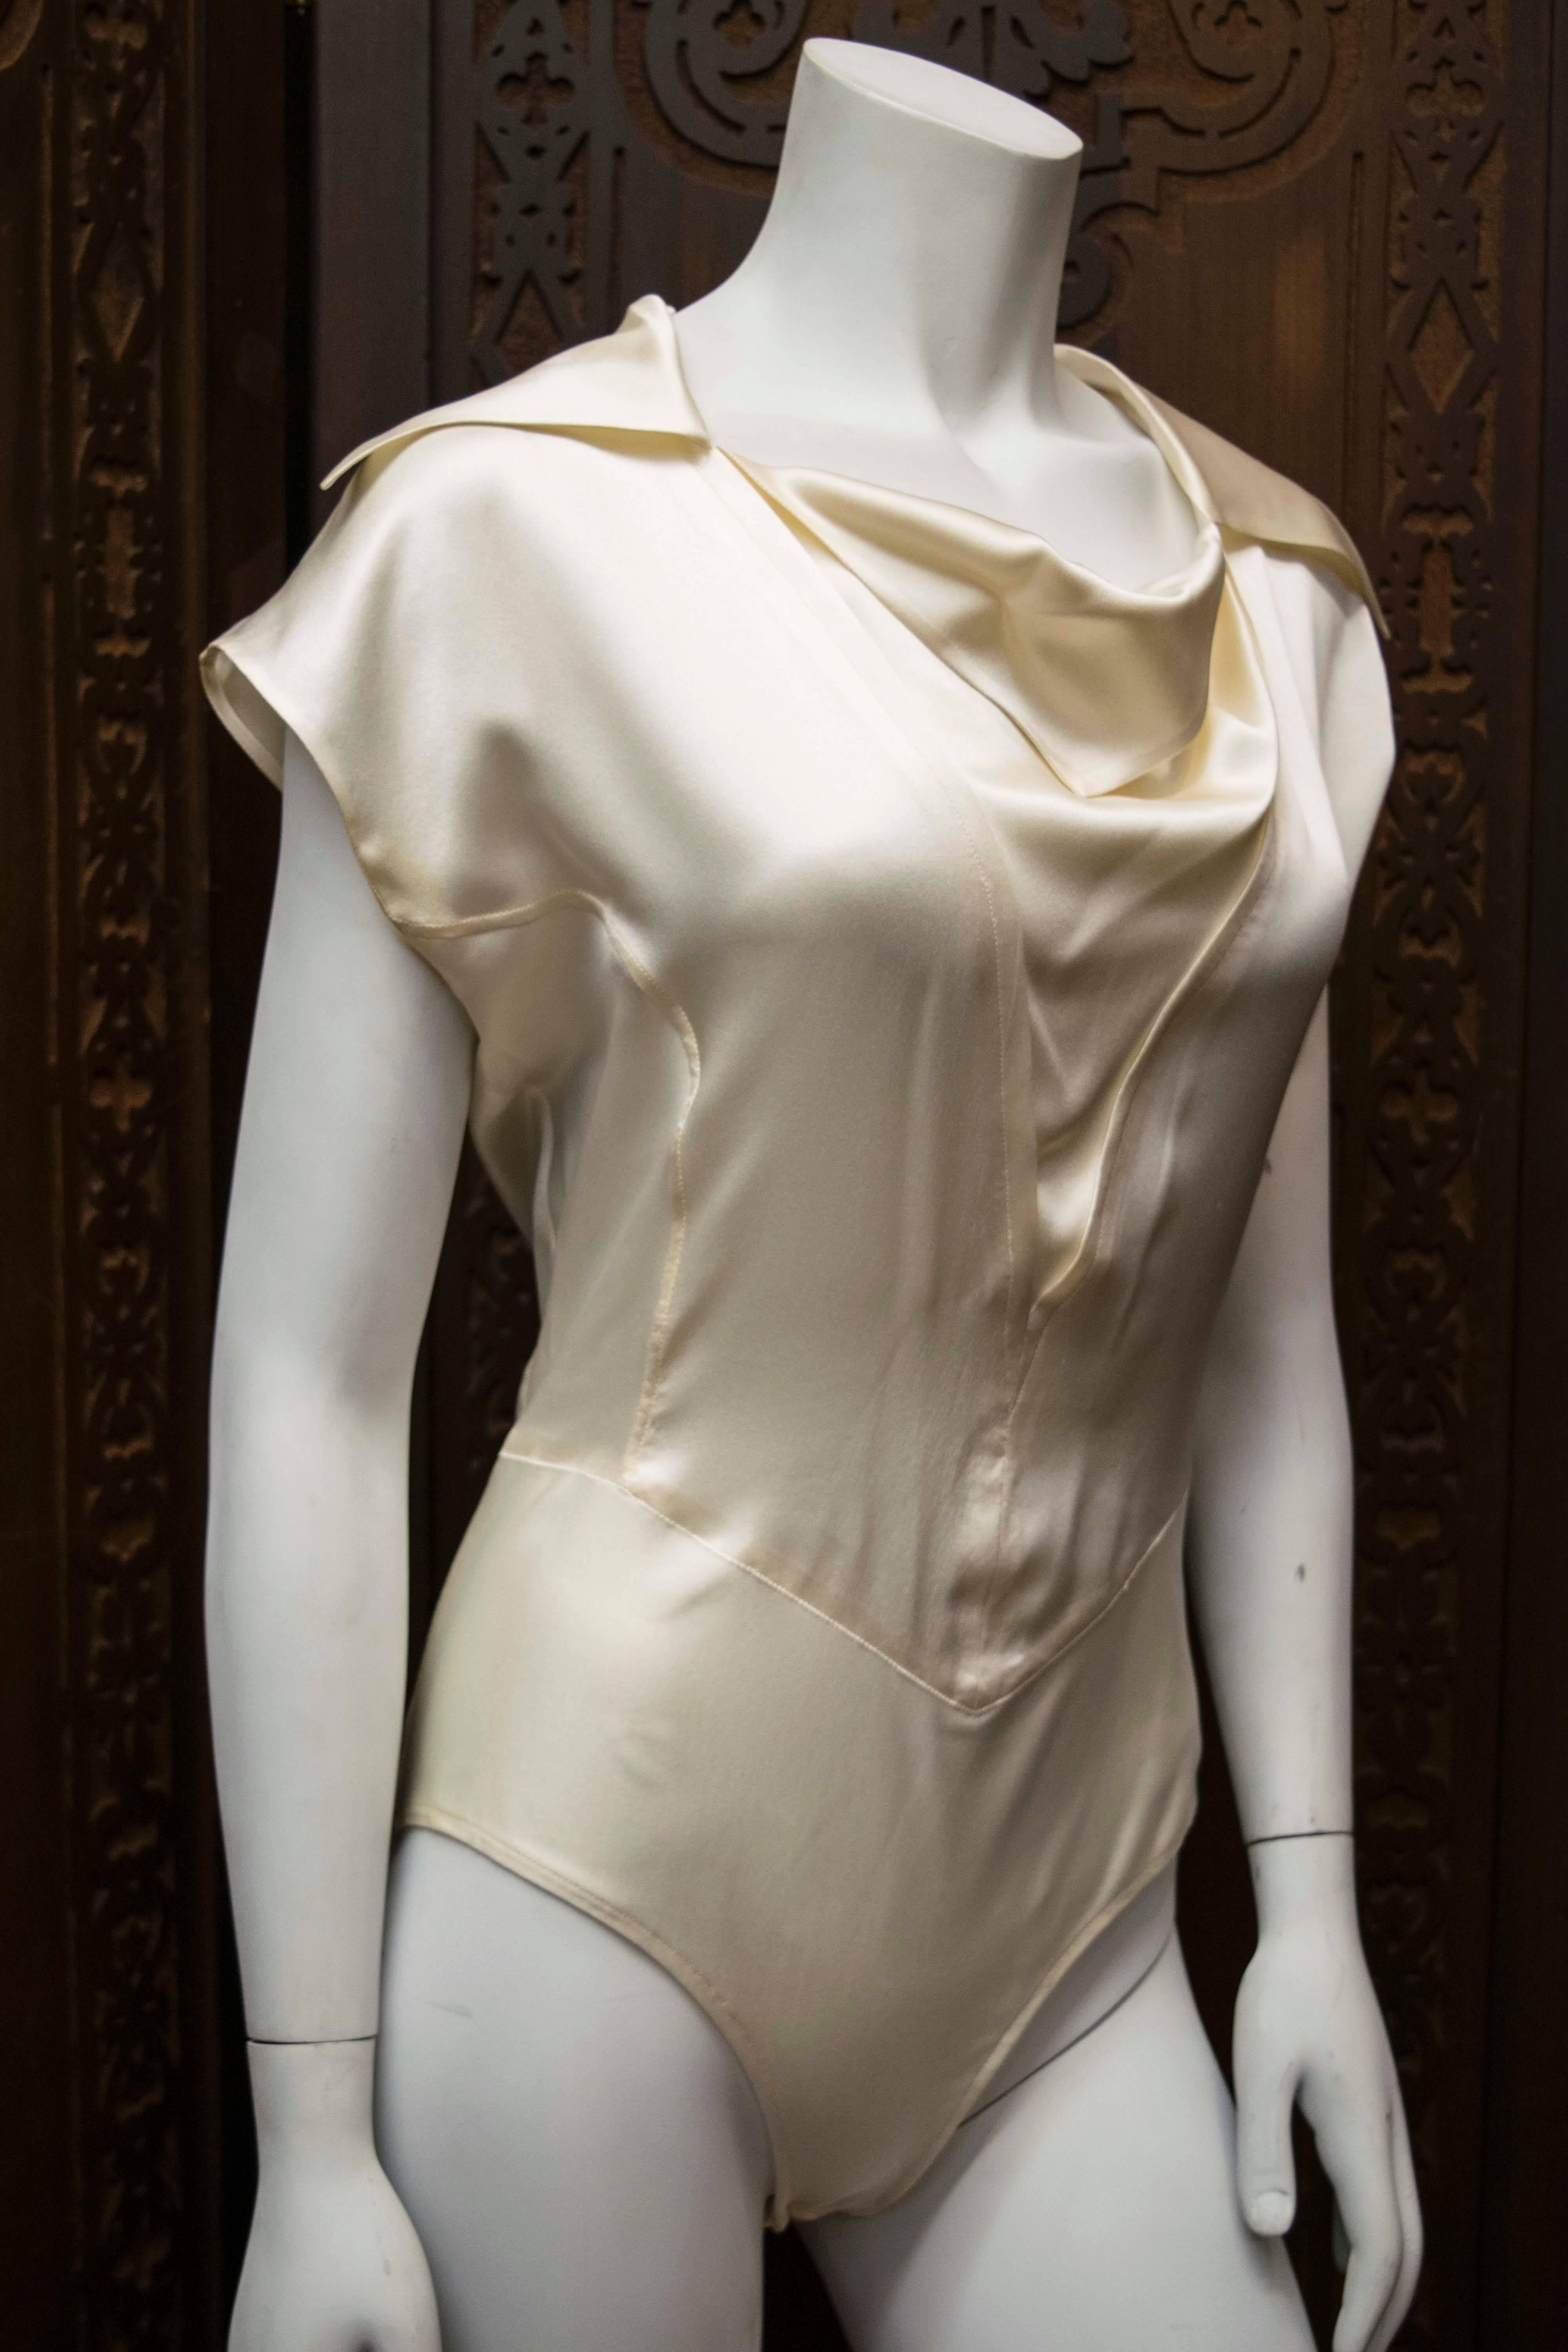 1990s Karl Lagerfeld Ivory Silk Blouse 

Gorgeous 100% silk Karl Lagerfeld blouse circa 1990. This piece snaps in the crotch.

Size 40

B 40
W 34
H 36
L 32
